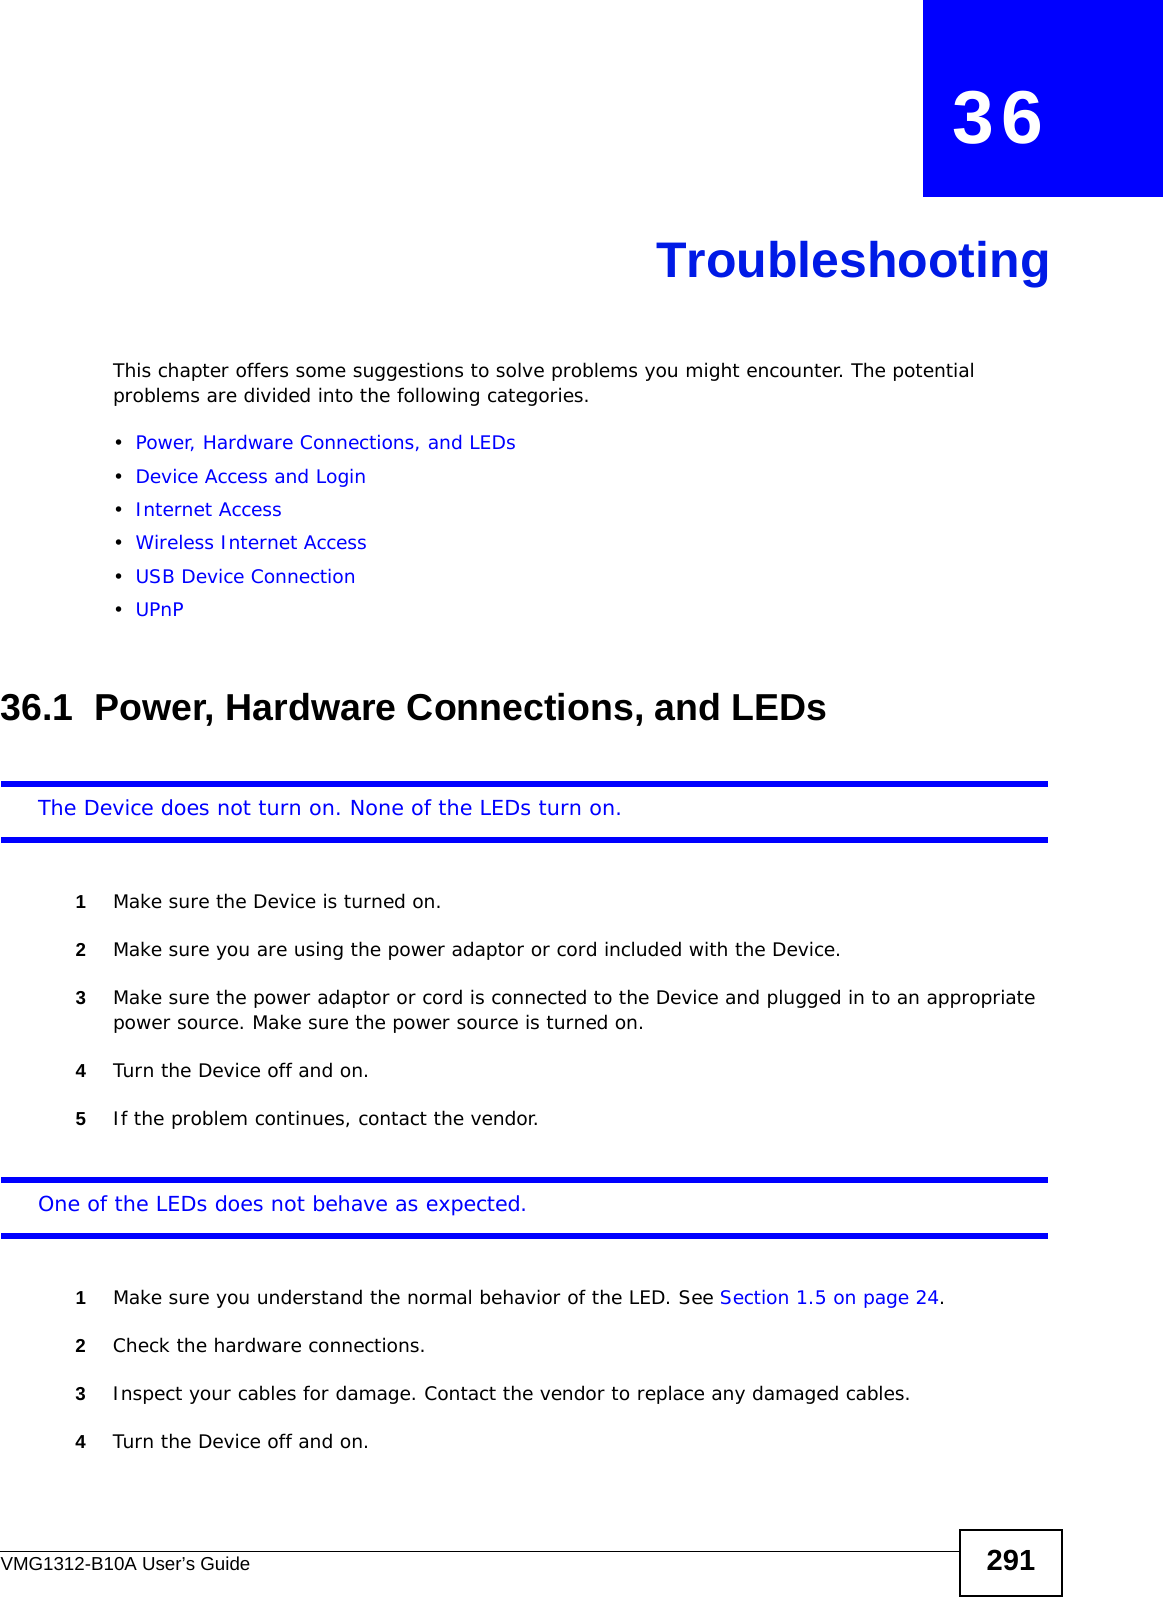 VMG1312-B10A User’s Guide 291CHAPTER   36TroubleshootingThis chapter offers some suggestions to solve problems you might encounter. The potential problems are divided into the following categories. •Power, Hardware Connections, and LEDs•Device Access and Login•Internet Access•Wireless Internet Access•USB Device Connection•UPnP36.1  Power, Hardware Connections, and LEDsThe Device does not turn on. None of the LEDs turn on.1Make sure the Device is turned on. 2Make sure you are using the power adaptor or cord included with the Device.3Make sure the power adaptor or cord is connected to the Device and plugged in to an appropriate power source. Make sure the power source is turned on.4Turn the Device off and on.5If the problem continues, contact the vendor.One of the LEDs does not behave as expected.1Make sure you understand the normal behavior of the LED. See Section 1.5 on page 24.2Check the hardware connections.3Inspect your cables for damage. Contact the vendor to replace any damaged cables.4Turn the Device off and on.